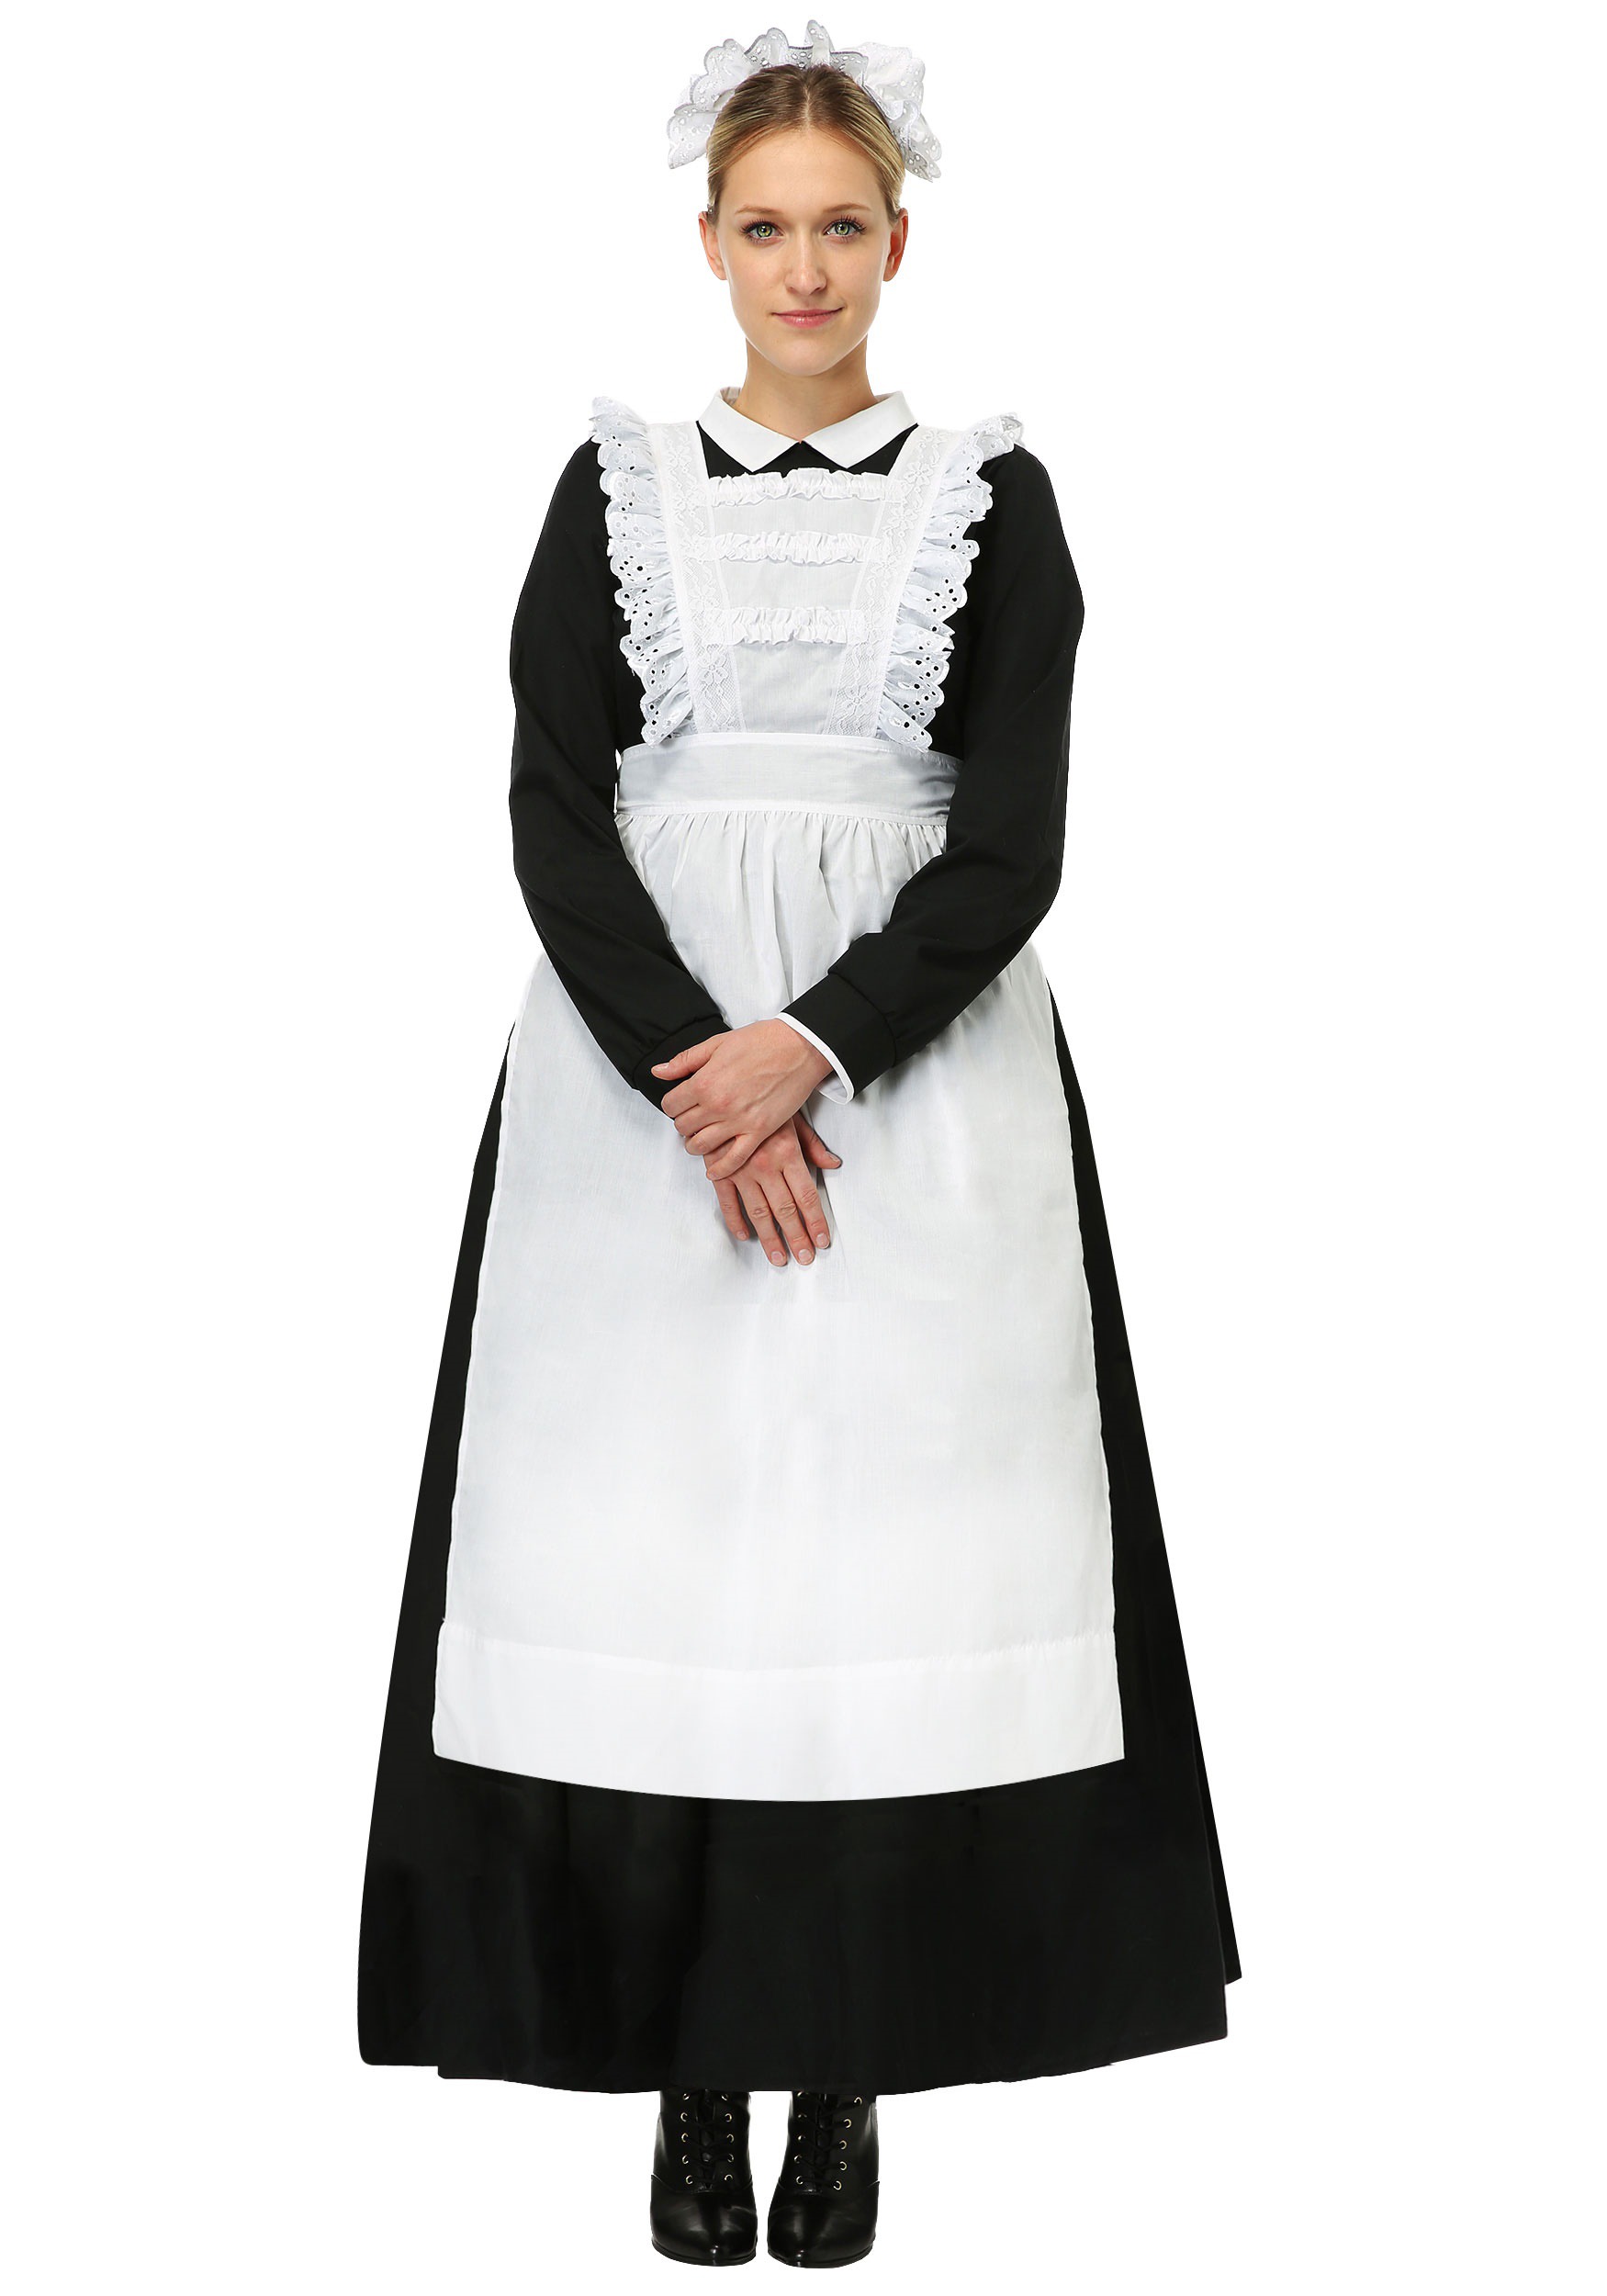 Image of Traditional Maid Costume for Women ID FUN1520AD-S